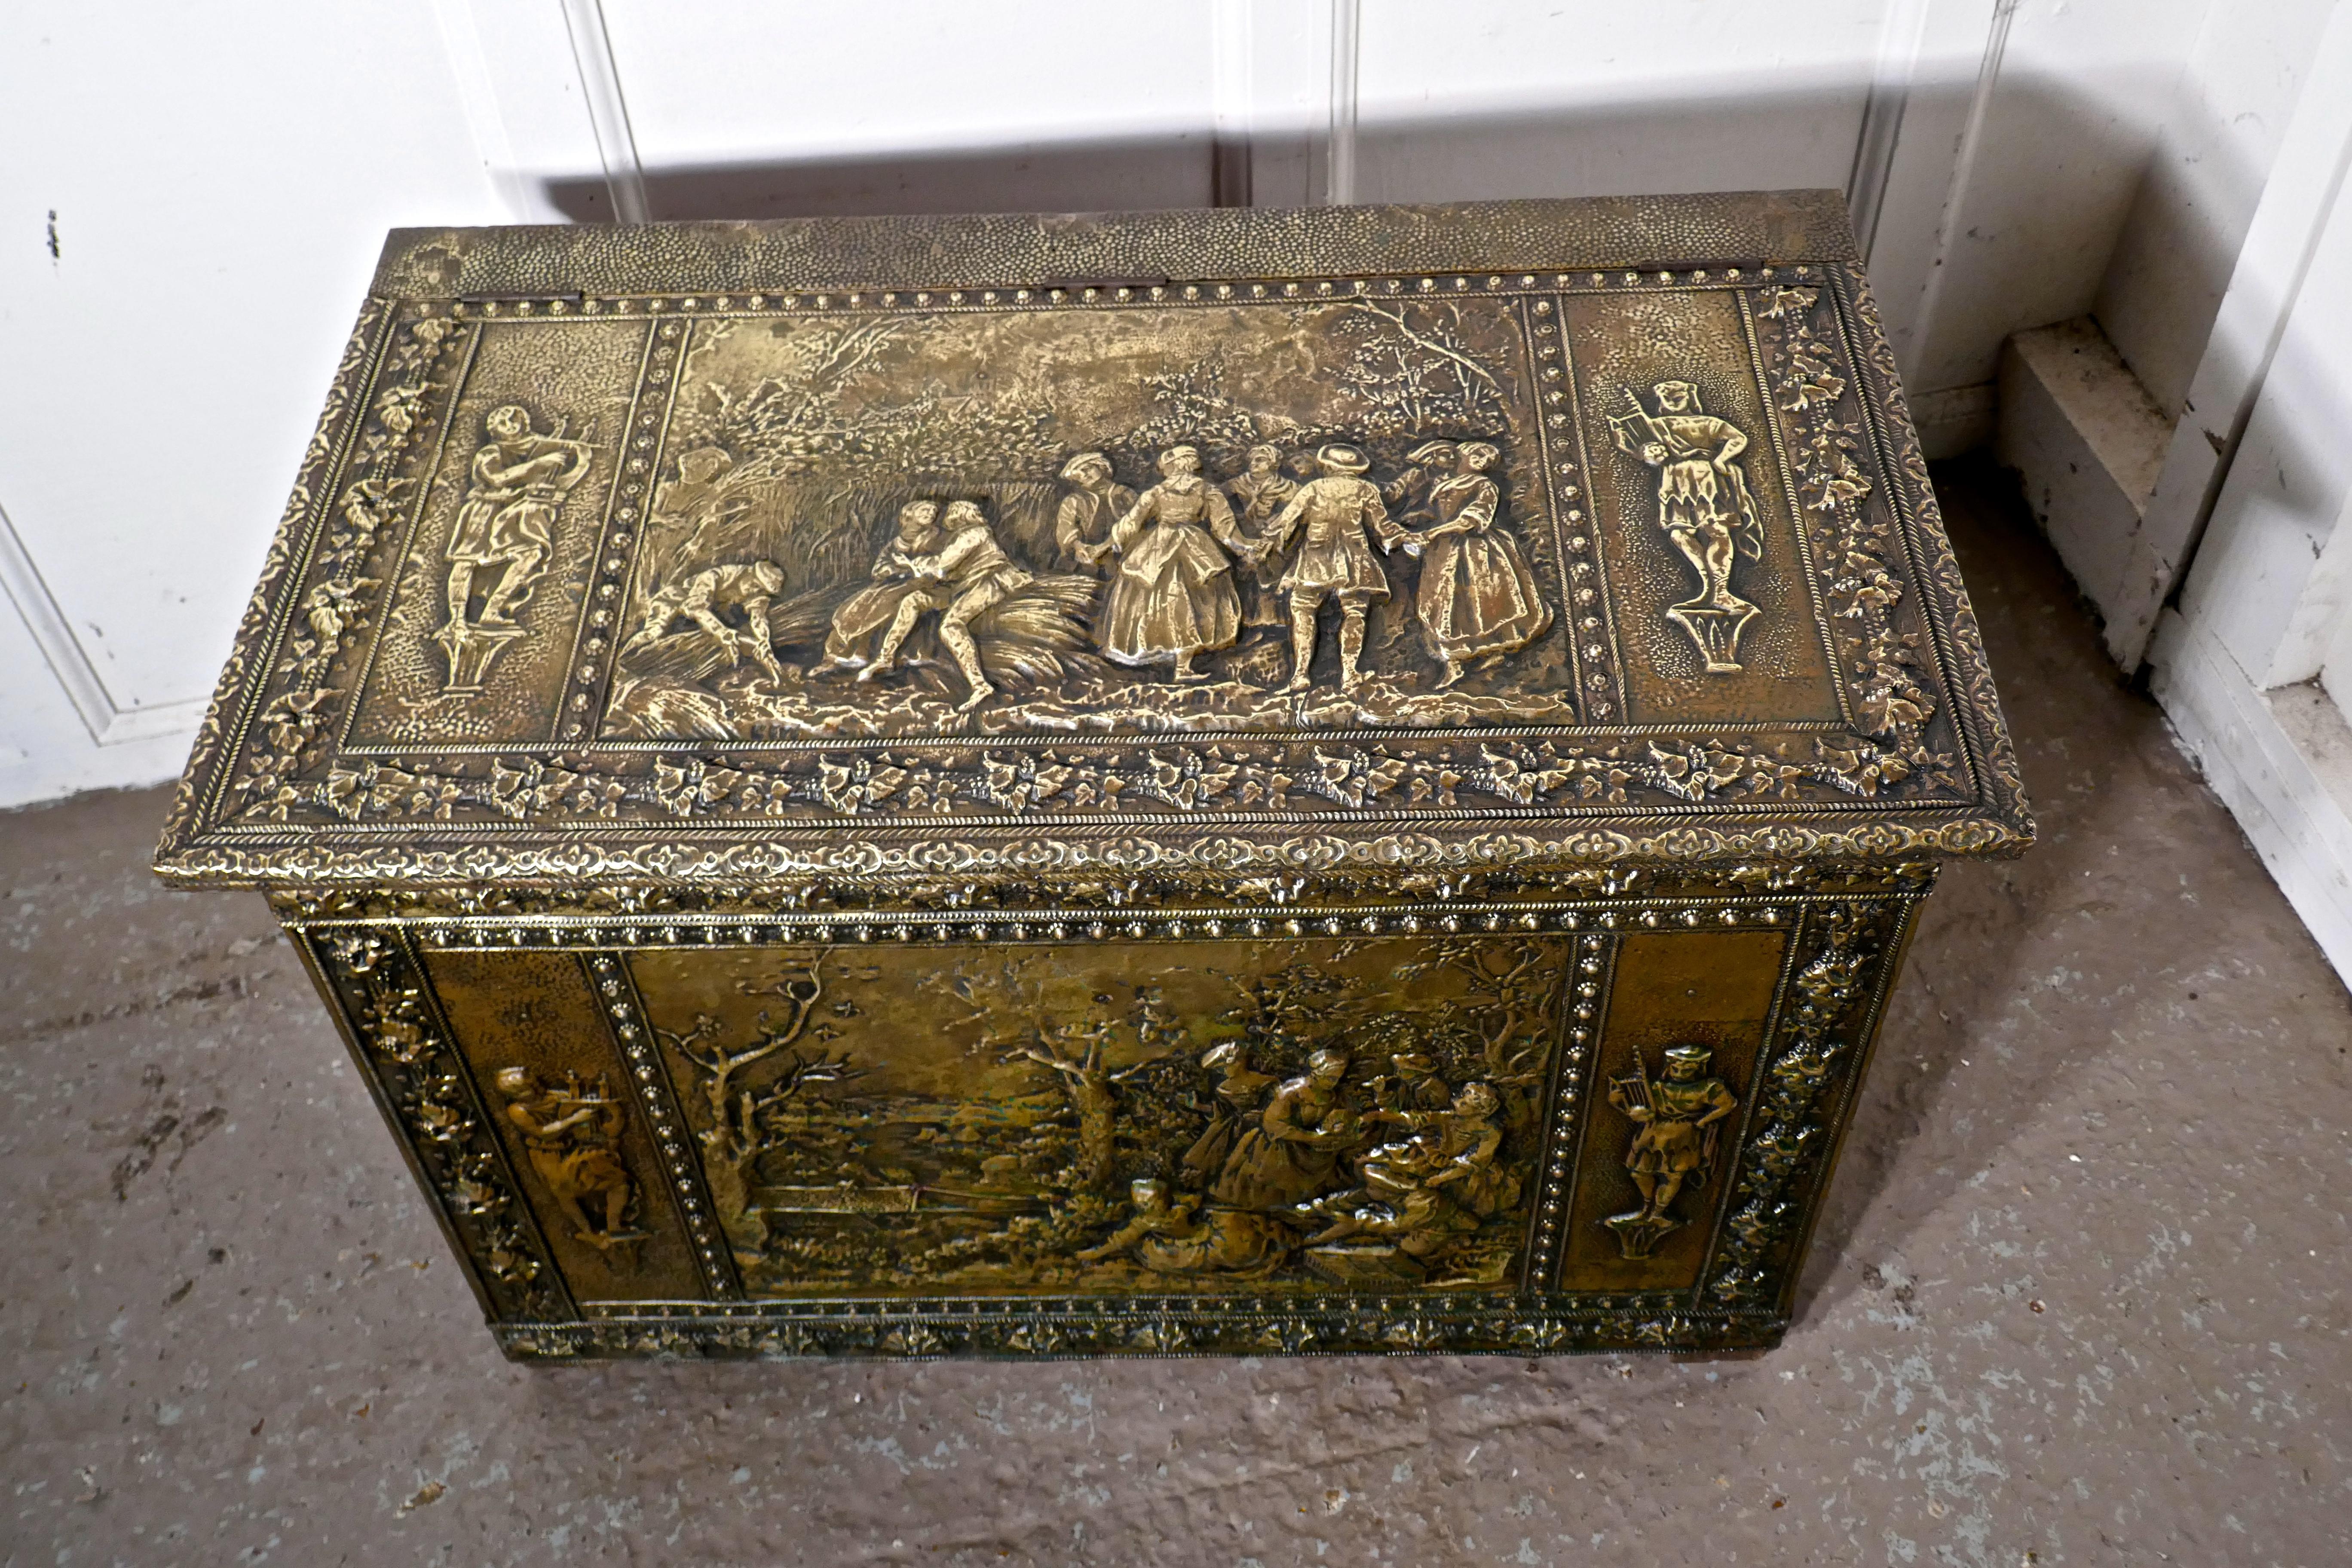 Very large French embossed brass log box, with country scenes

This is a large chest is made in brass with a wooden lining, the beaten brass is embossed with country scenes celebrating the harvest on the top and front, on the sides the scenes are